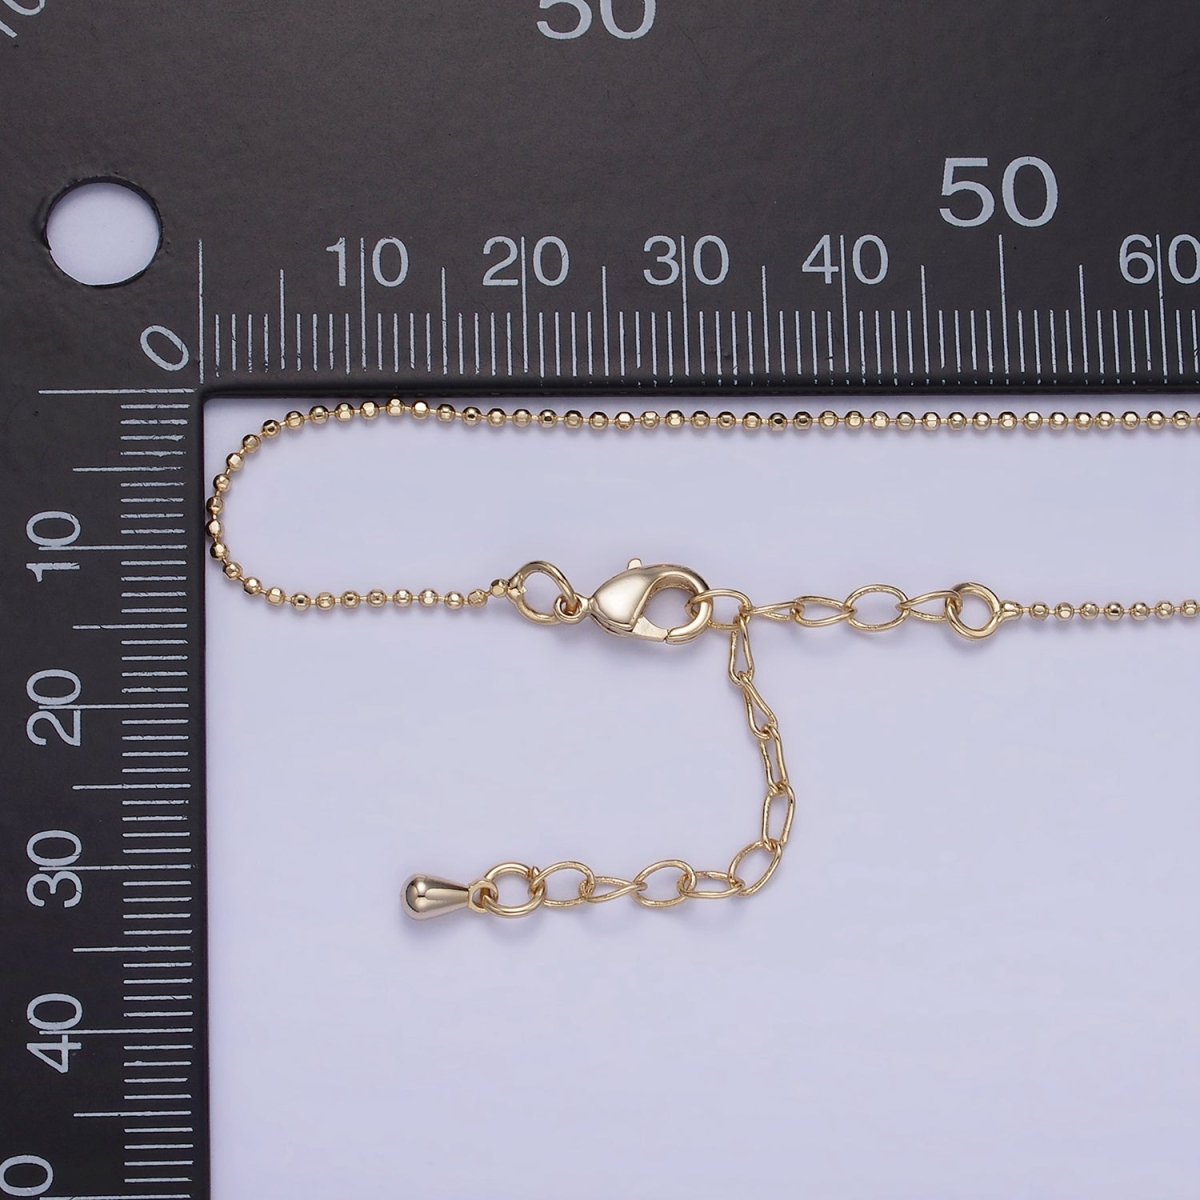 14K Gold Filled 1mm Bead Ball Chain 17.5 Inch, 19.5 Inch Necklace w. Extender | WA-2428 WA-2429 - DLUXCA